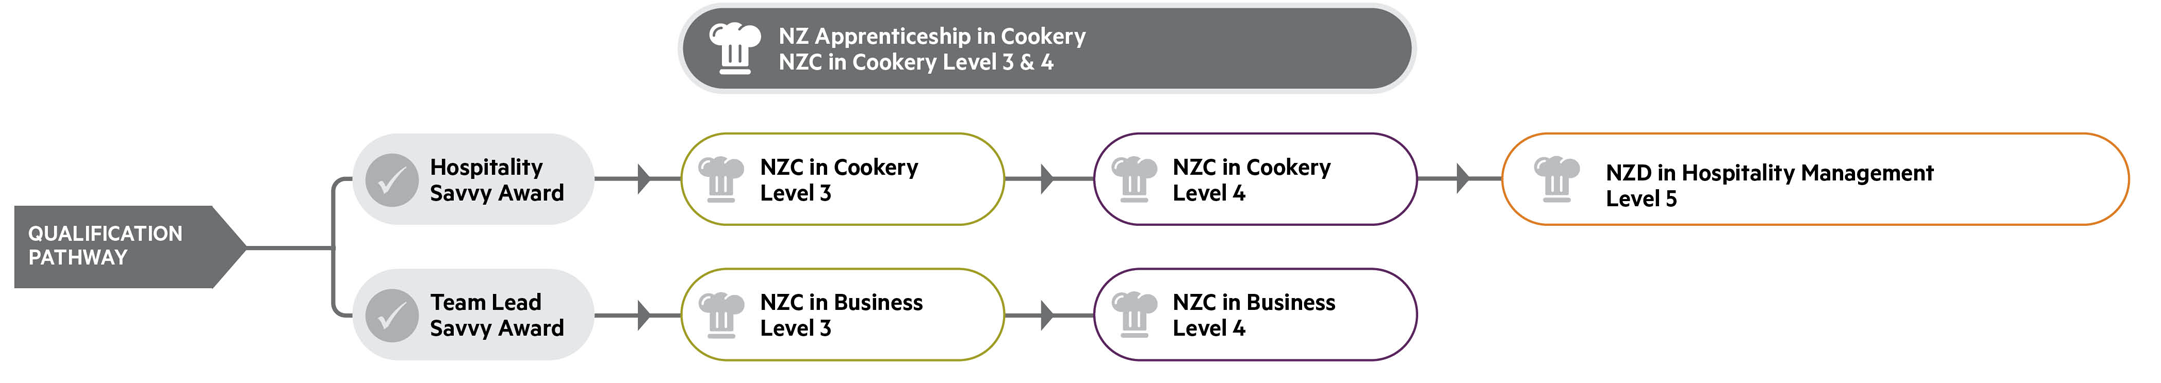 Cookery Qual pathway